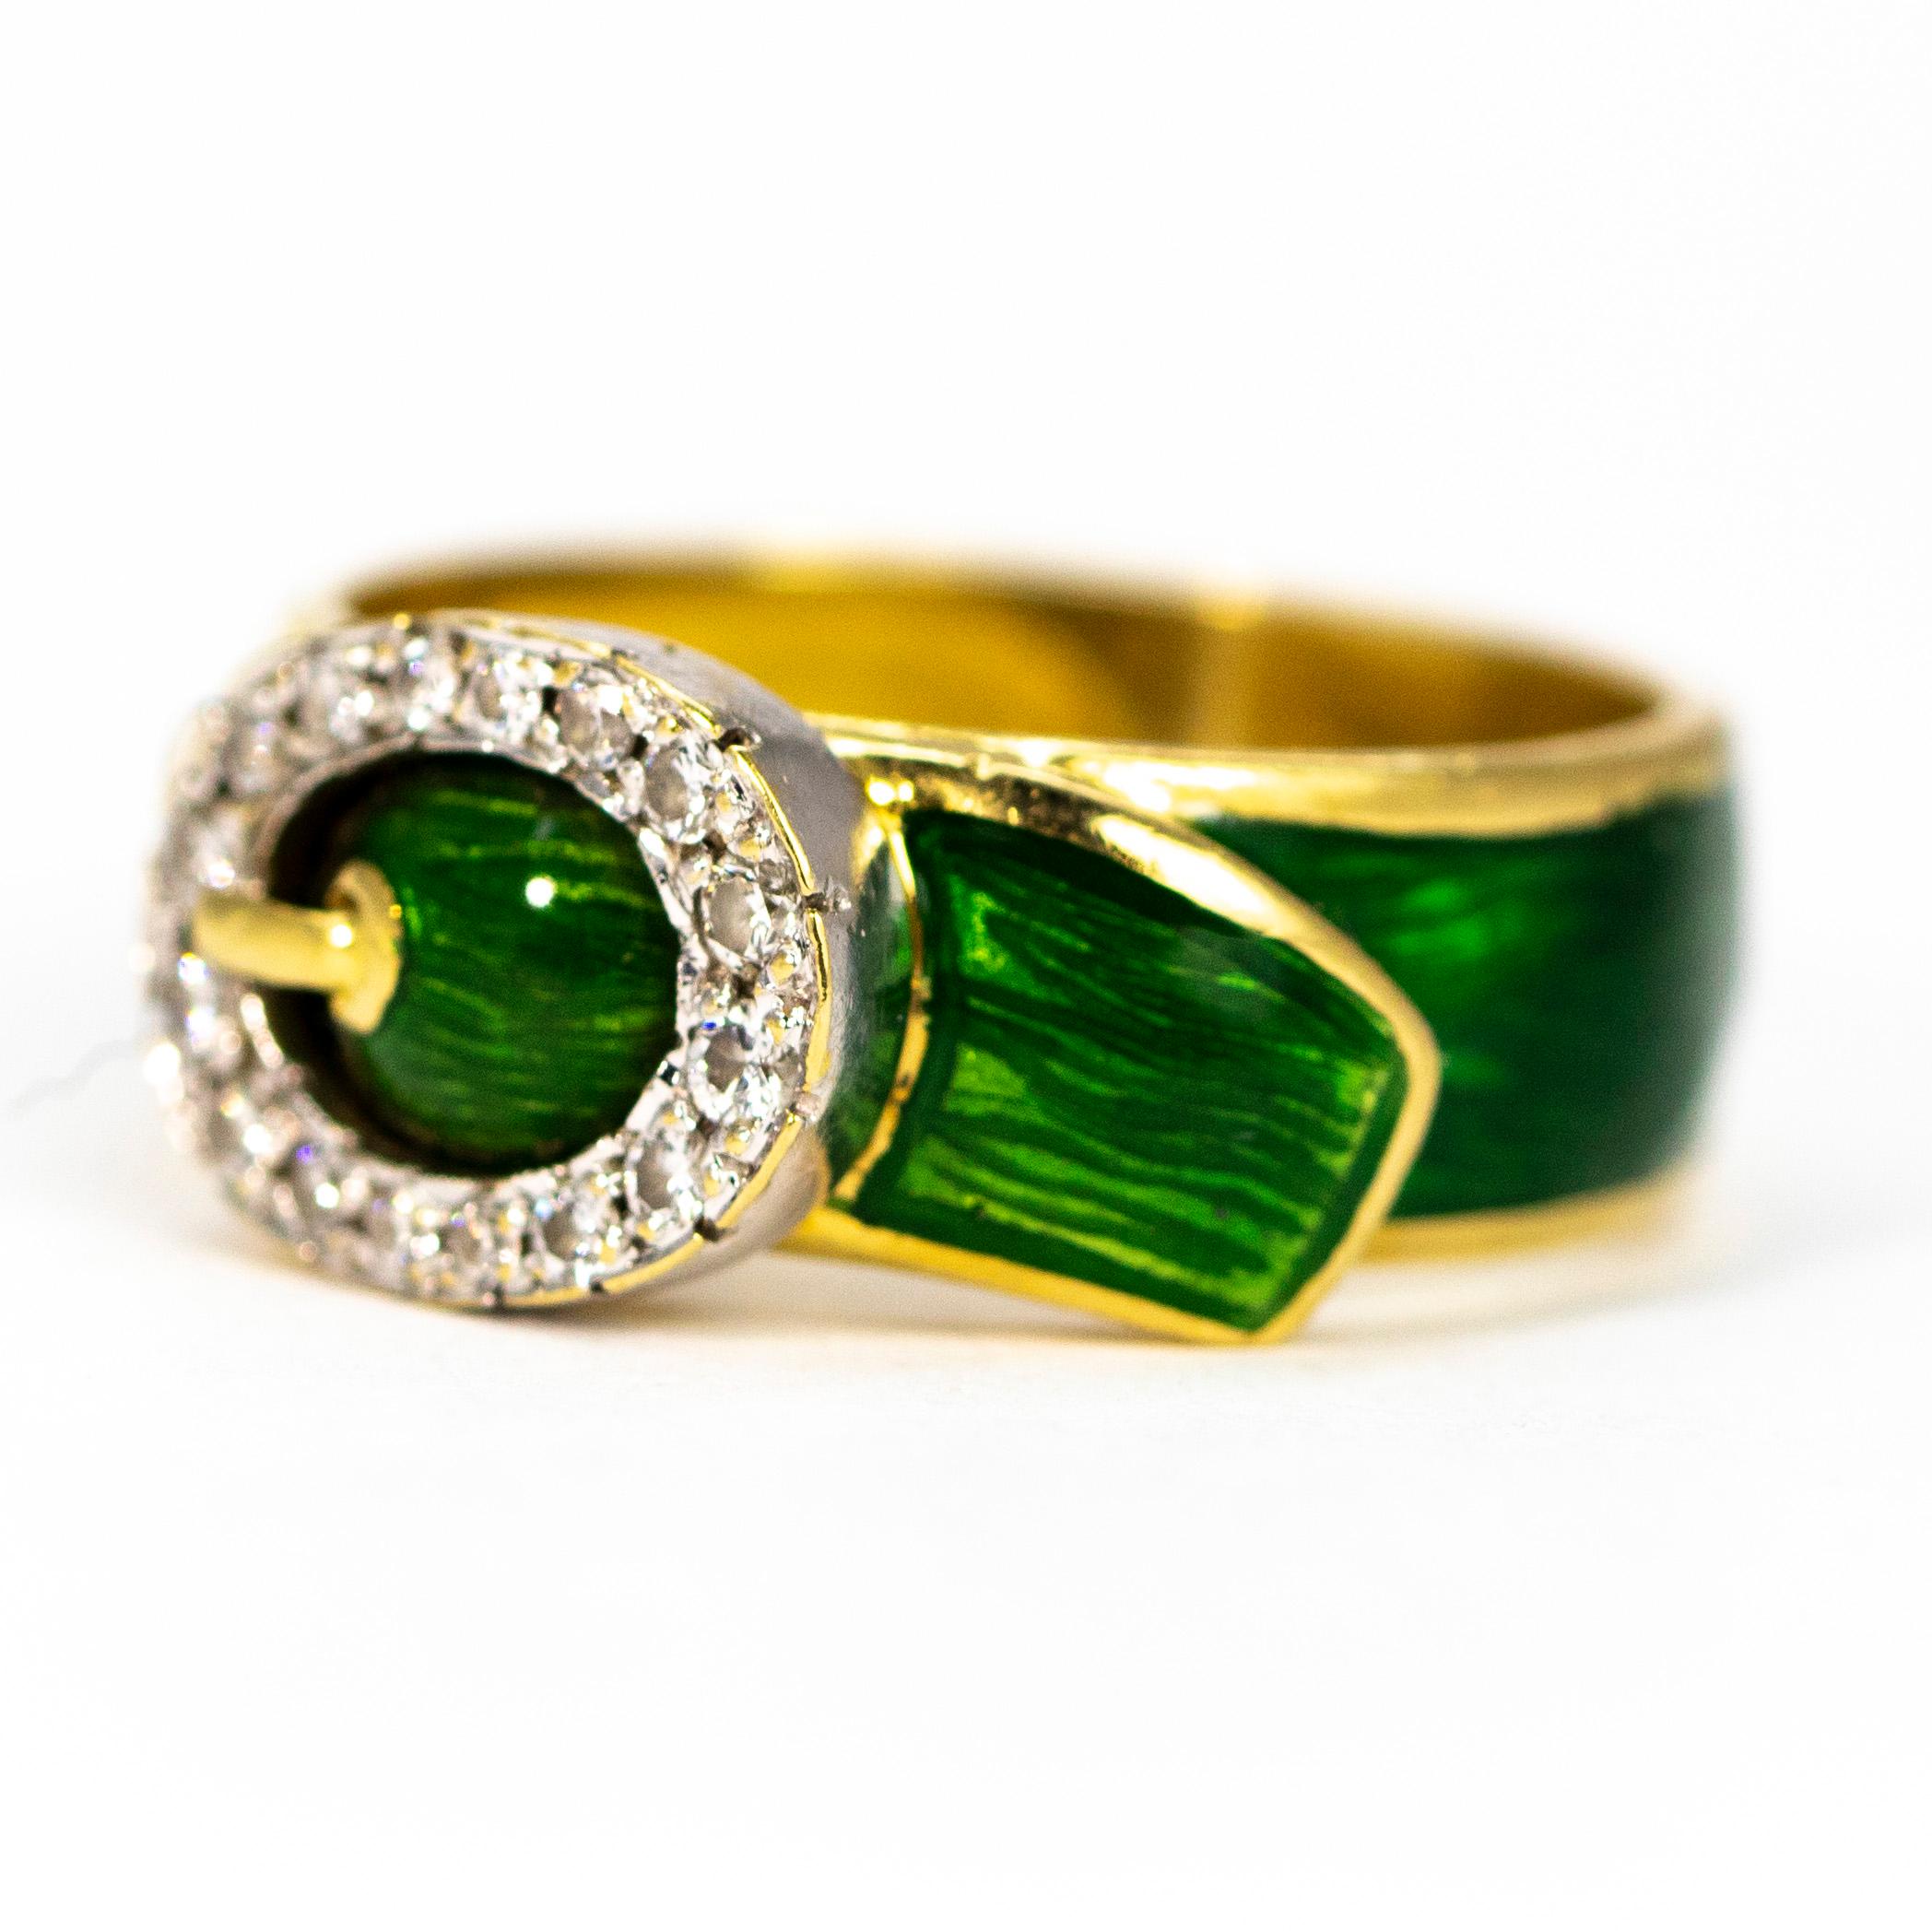 This show stopping piece features bright shimmering green enamel which is complemented perfectly against the 18ct gold. The buckle itself is set with a halo of diamonds which add a lovely sparkle!

Ring Size: N or 6 3/4
Band Width: 14mm

Weight: